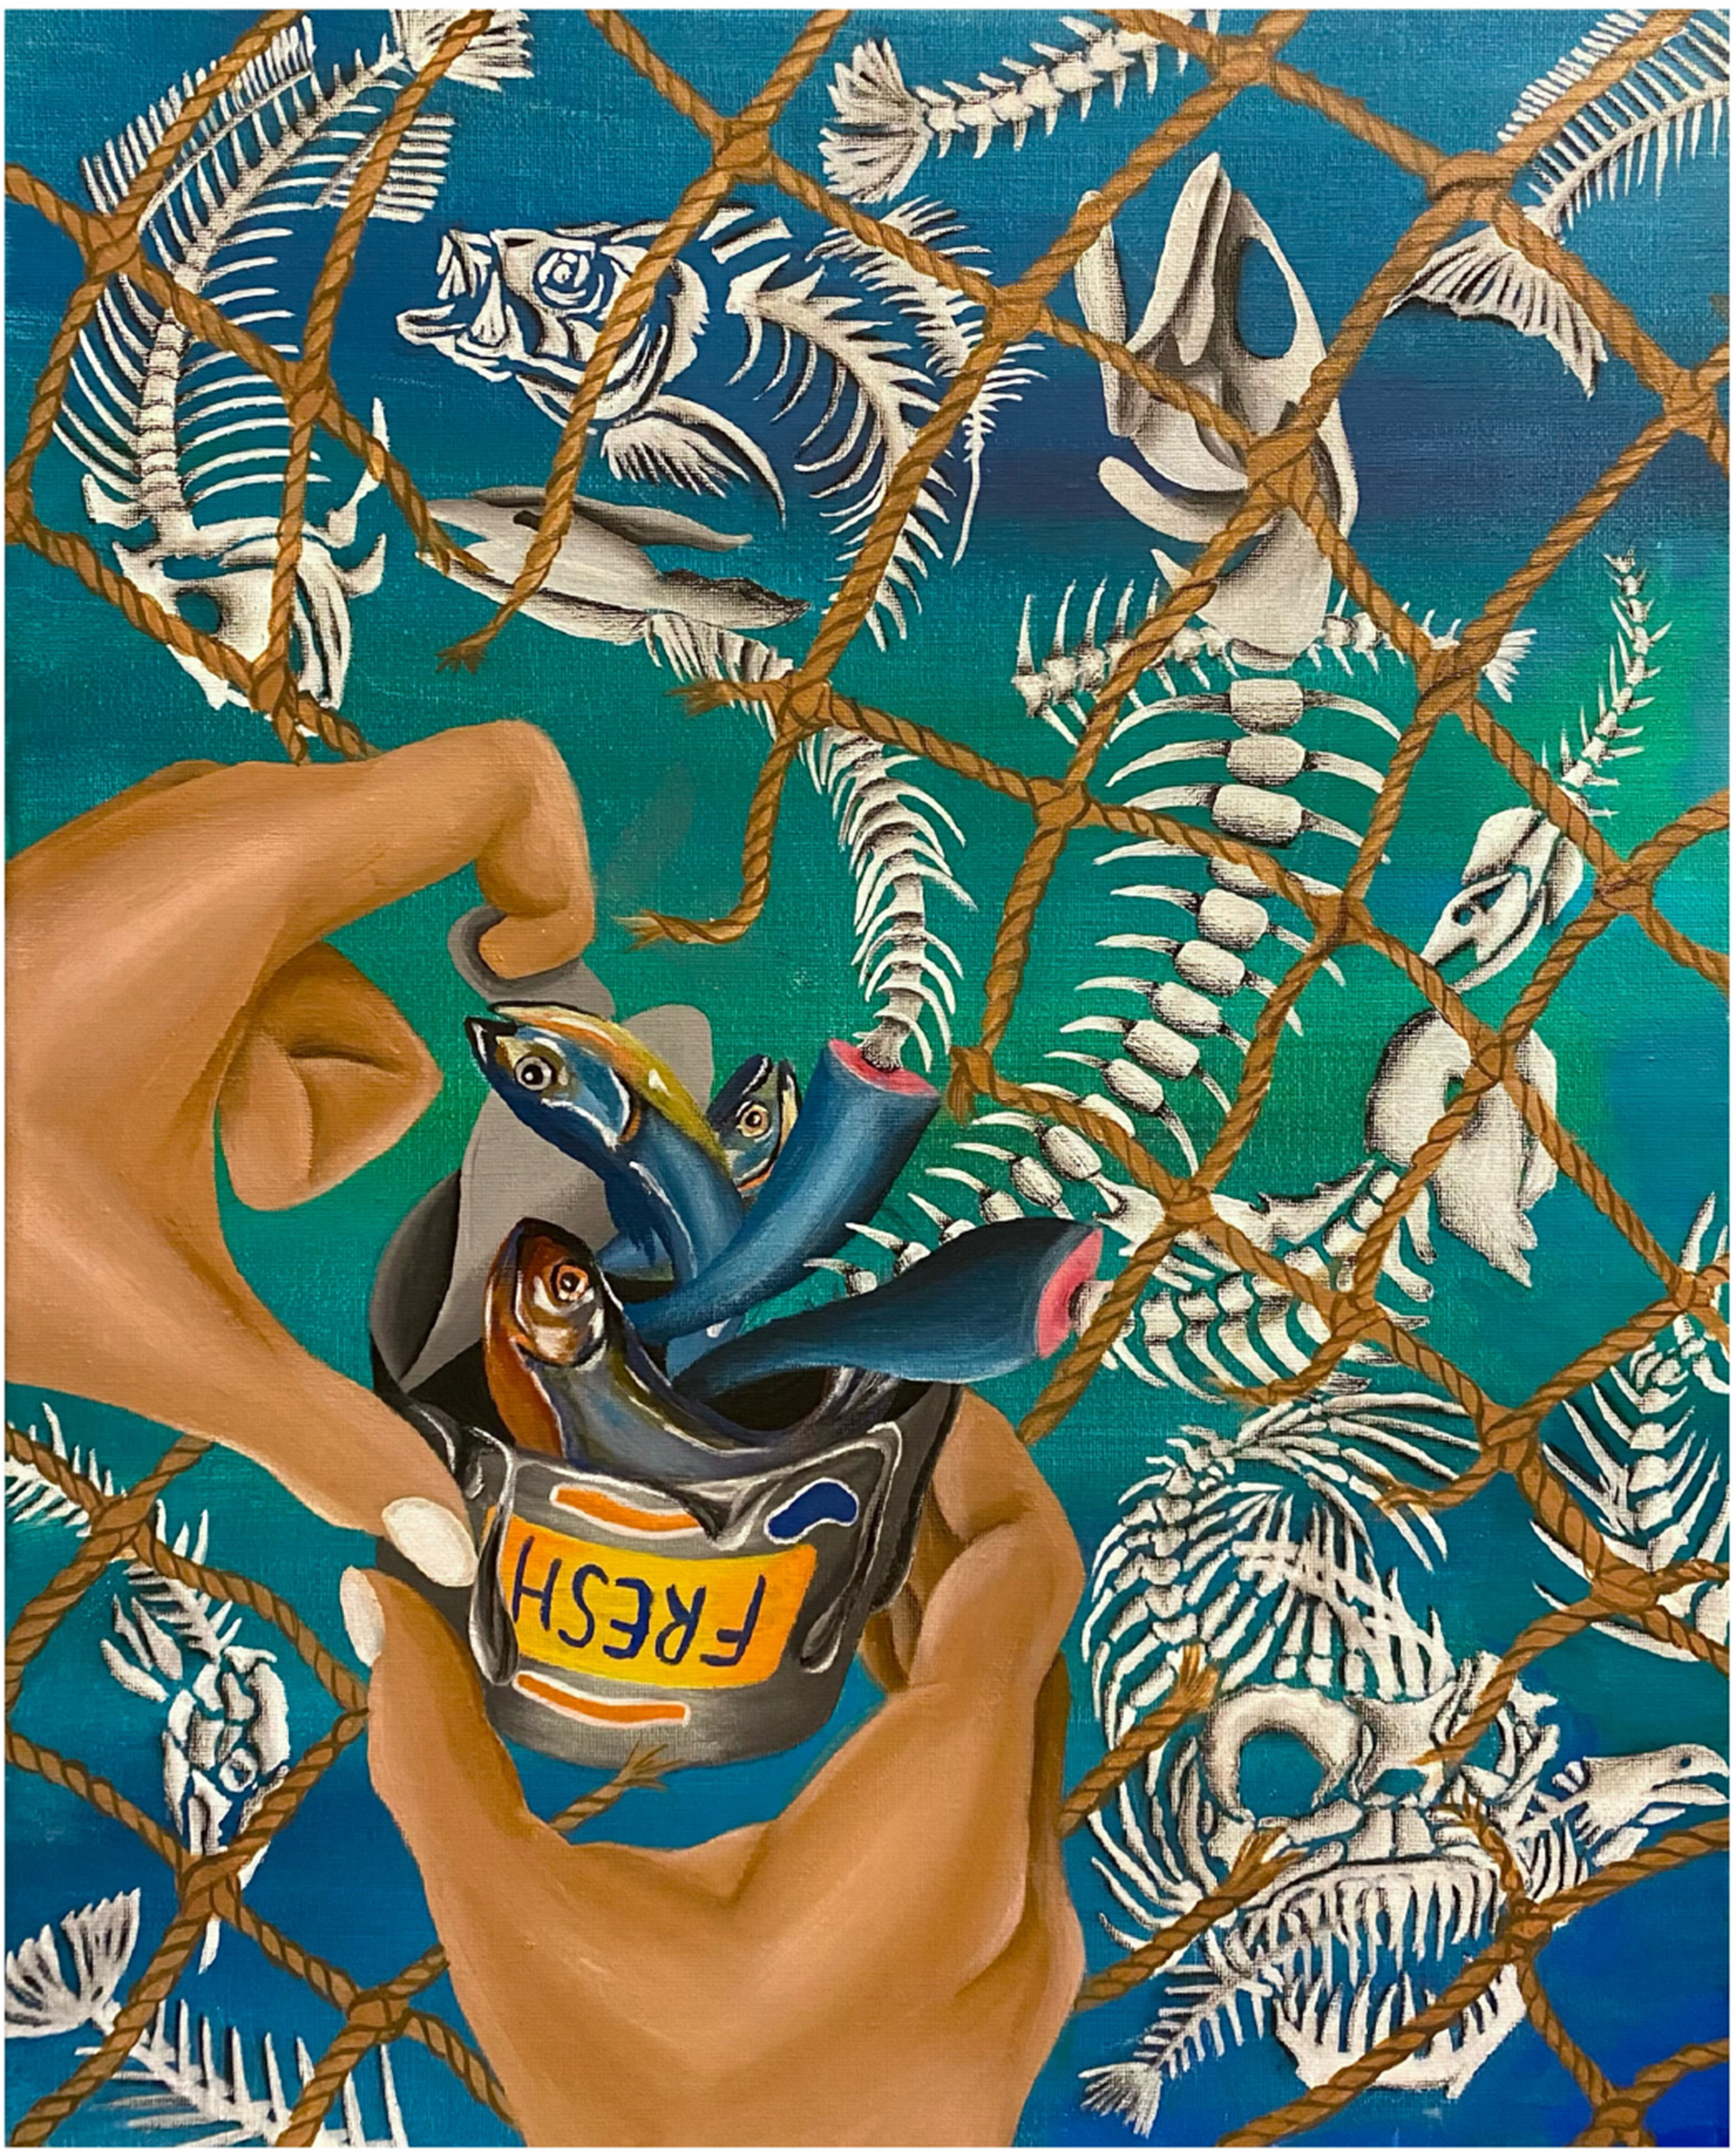 illustration of a hand opening a can labeled fresh as fish spill out against a background of fish bones in a net